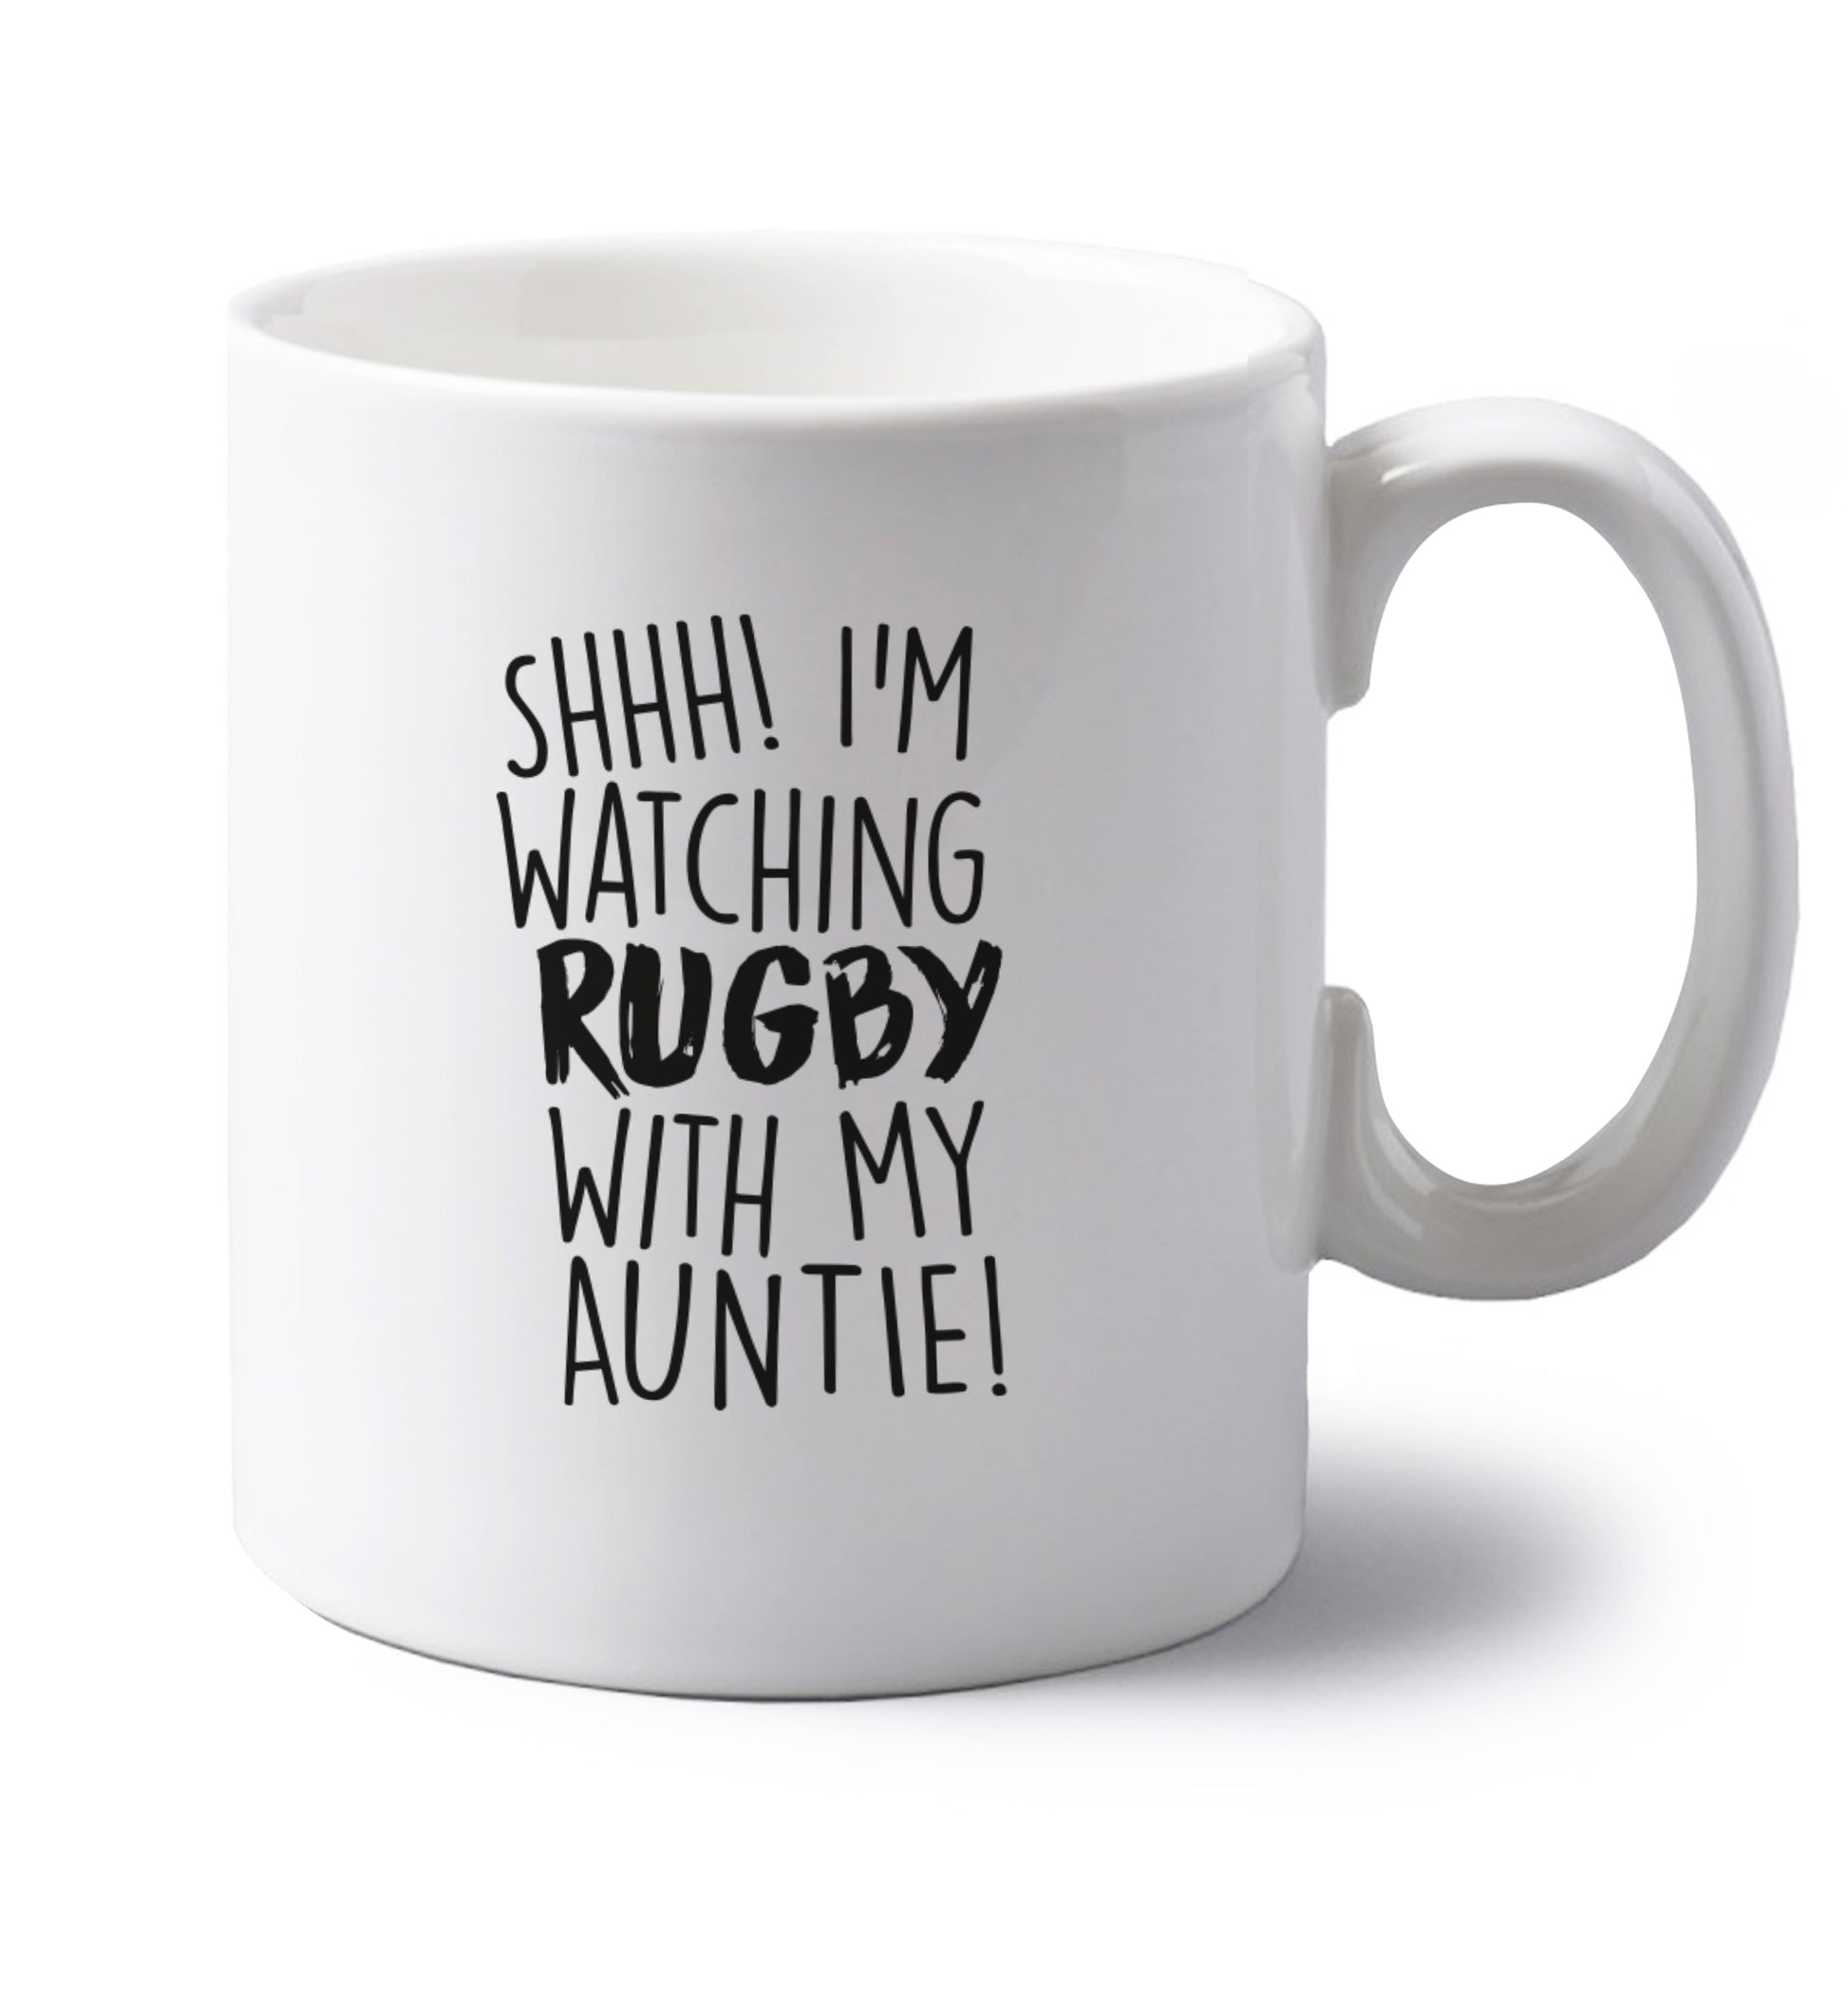 Shhh I'm watchin rugby with my auntie left handed white ceramic mug 